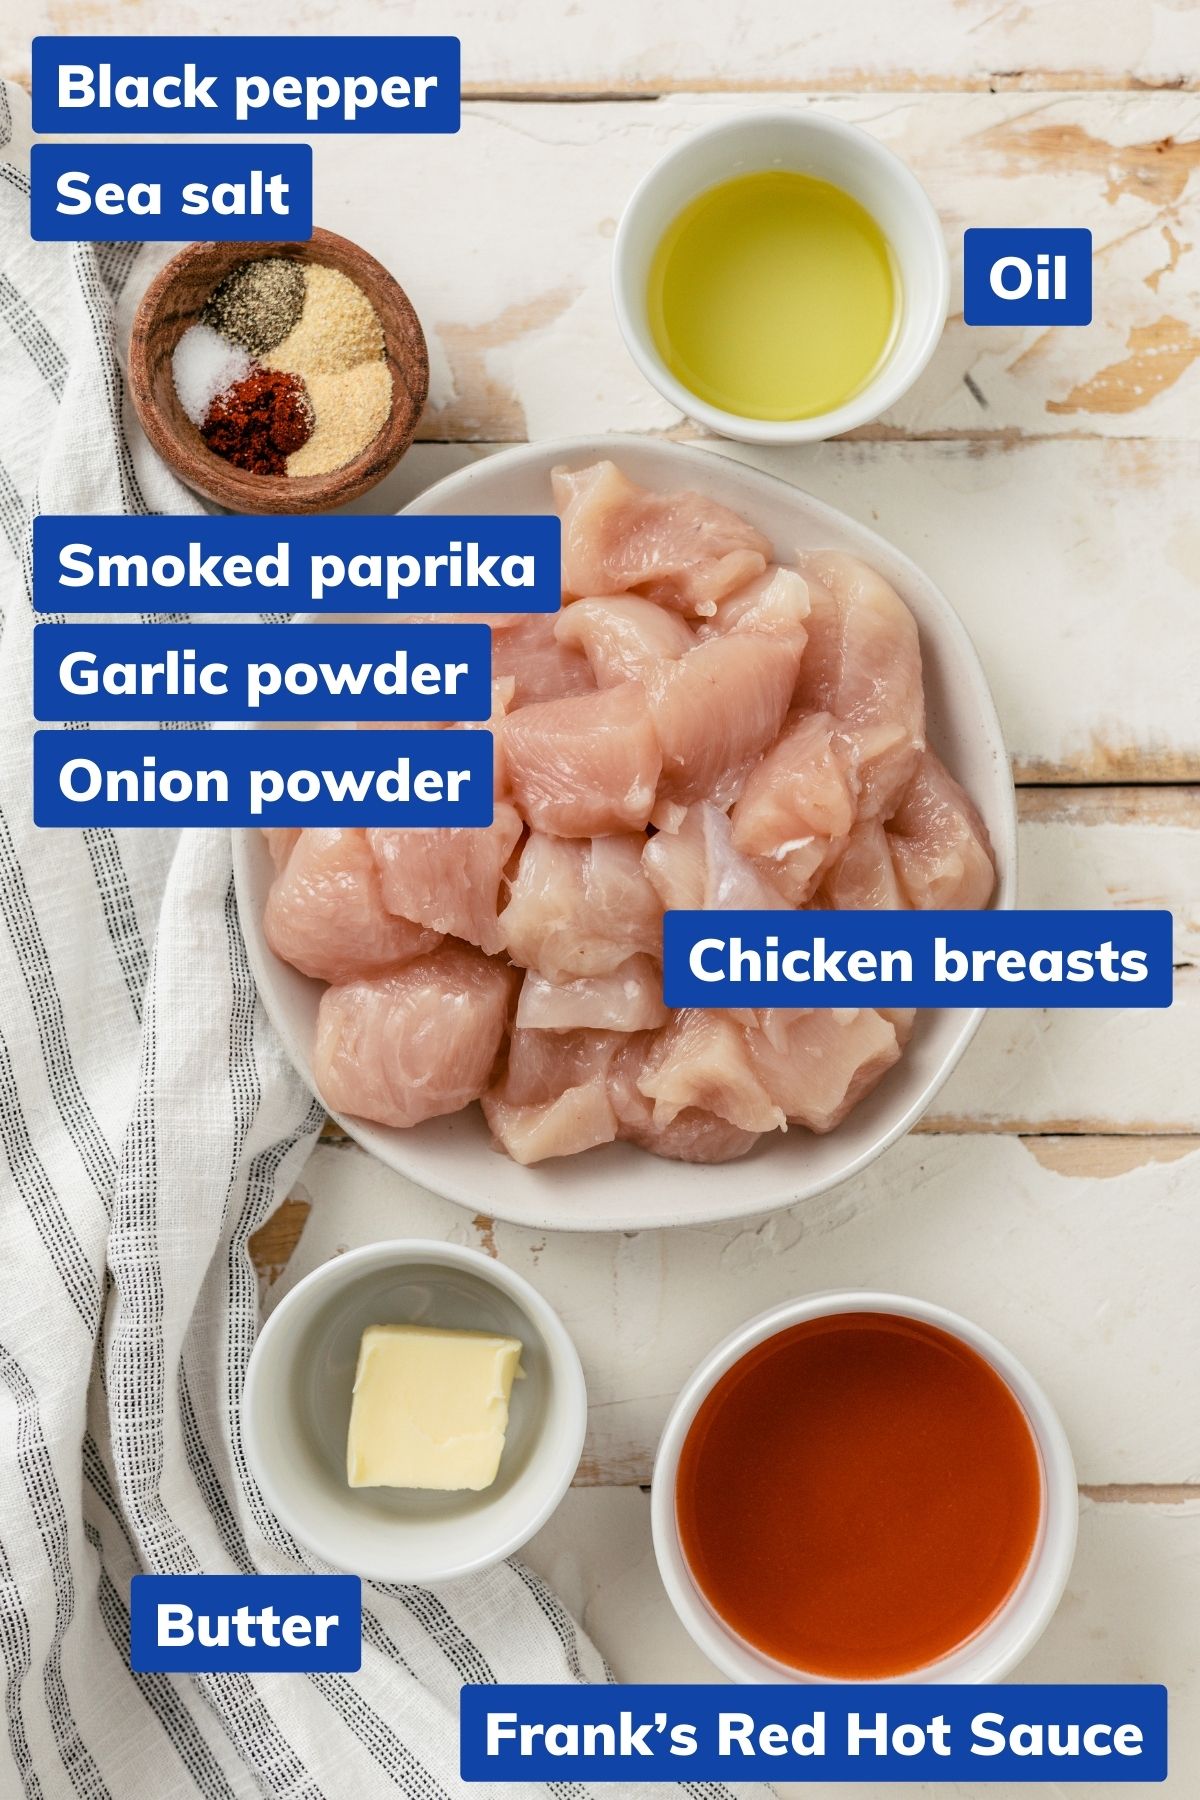 ingredients to make buffalo chicken bites (air fryer): Chicken breasts cut into bite-sized pieces, optional natural ancient sea salt, black pepper, smoked paprika, garlic powder, onion powder, a choice of avocado or olive oil, homemade buffalo sauce, Frank's Red Hot Sauce (or its buffalo wing variant), and unsalted butter are displayed in separate bowls.